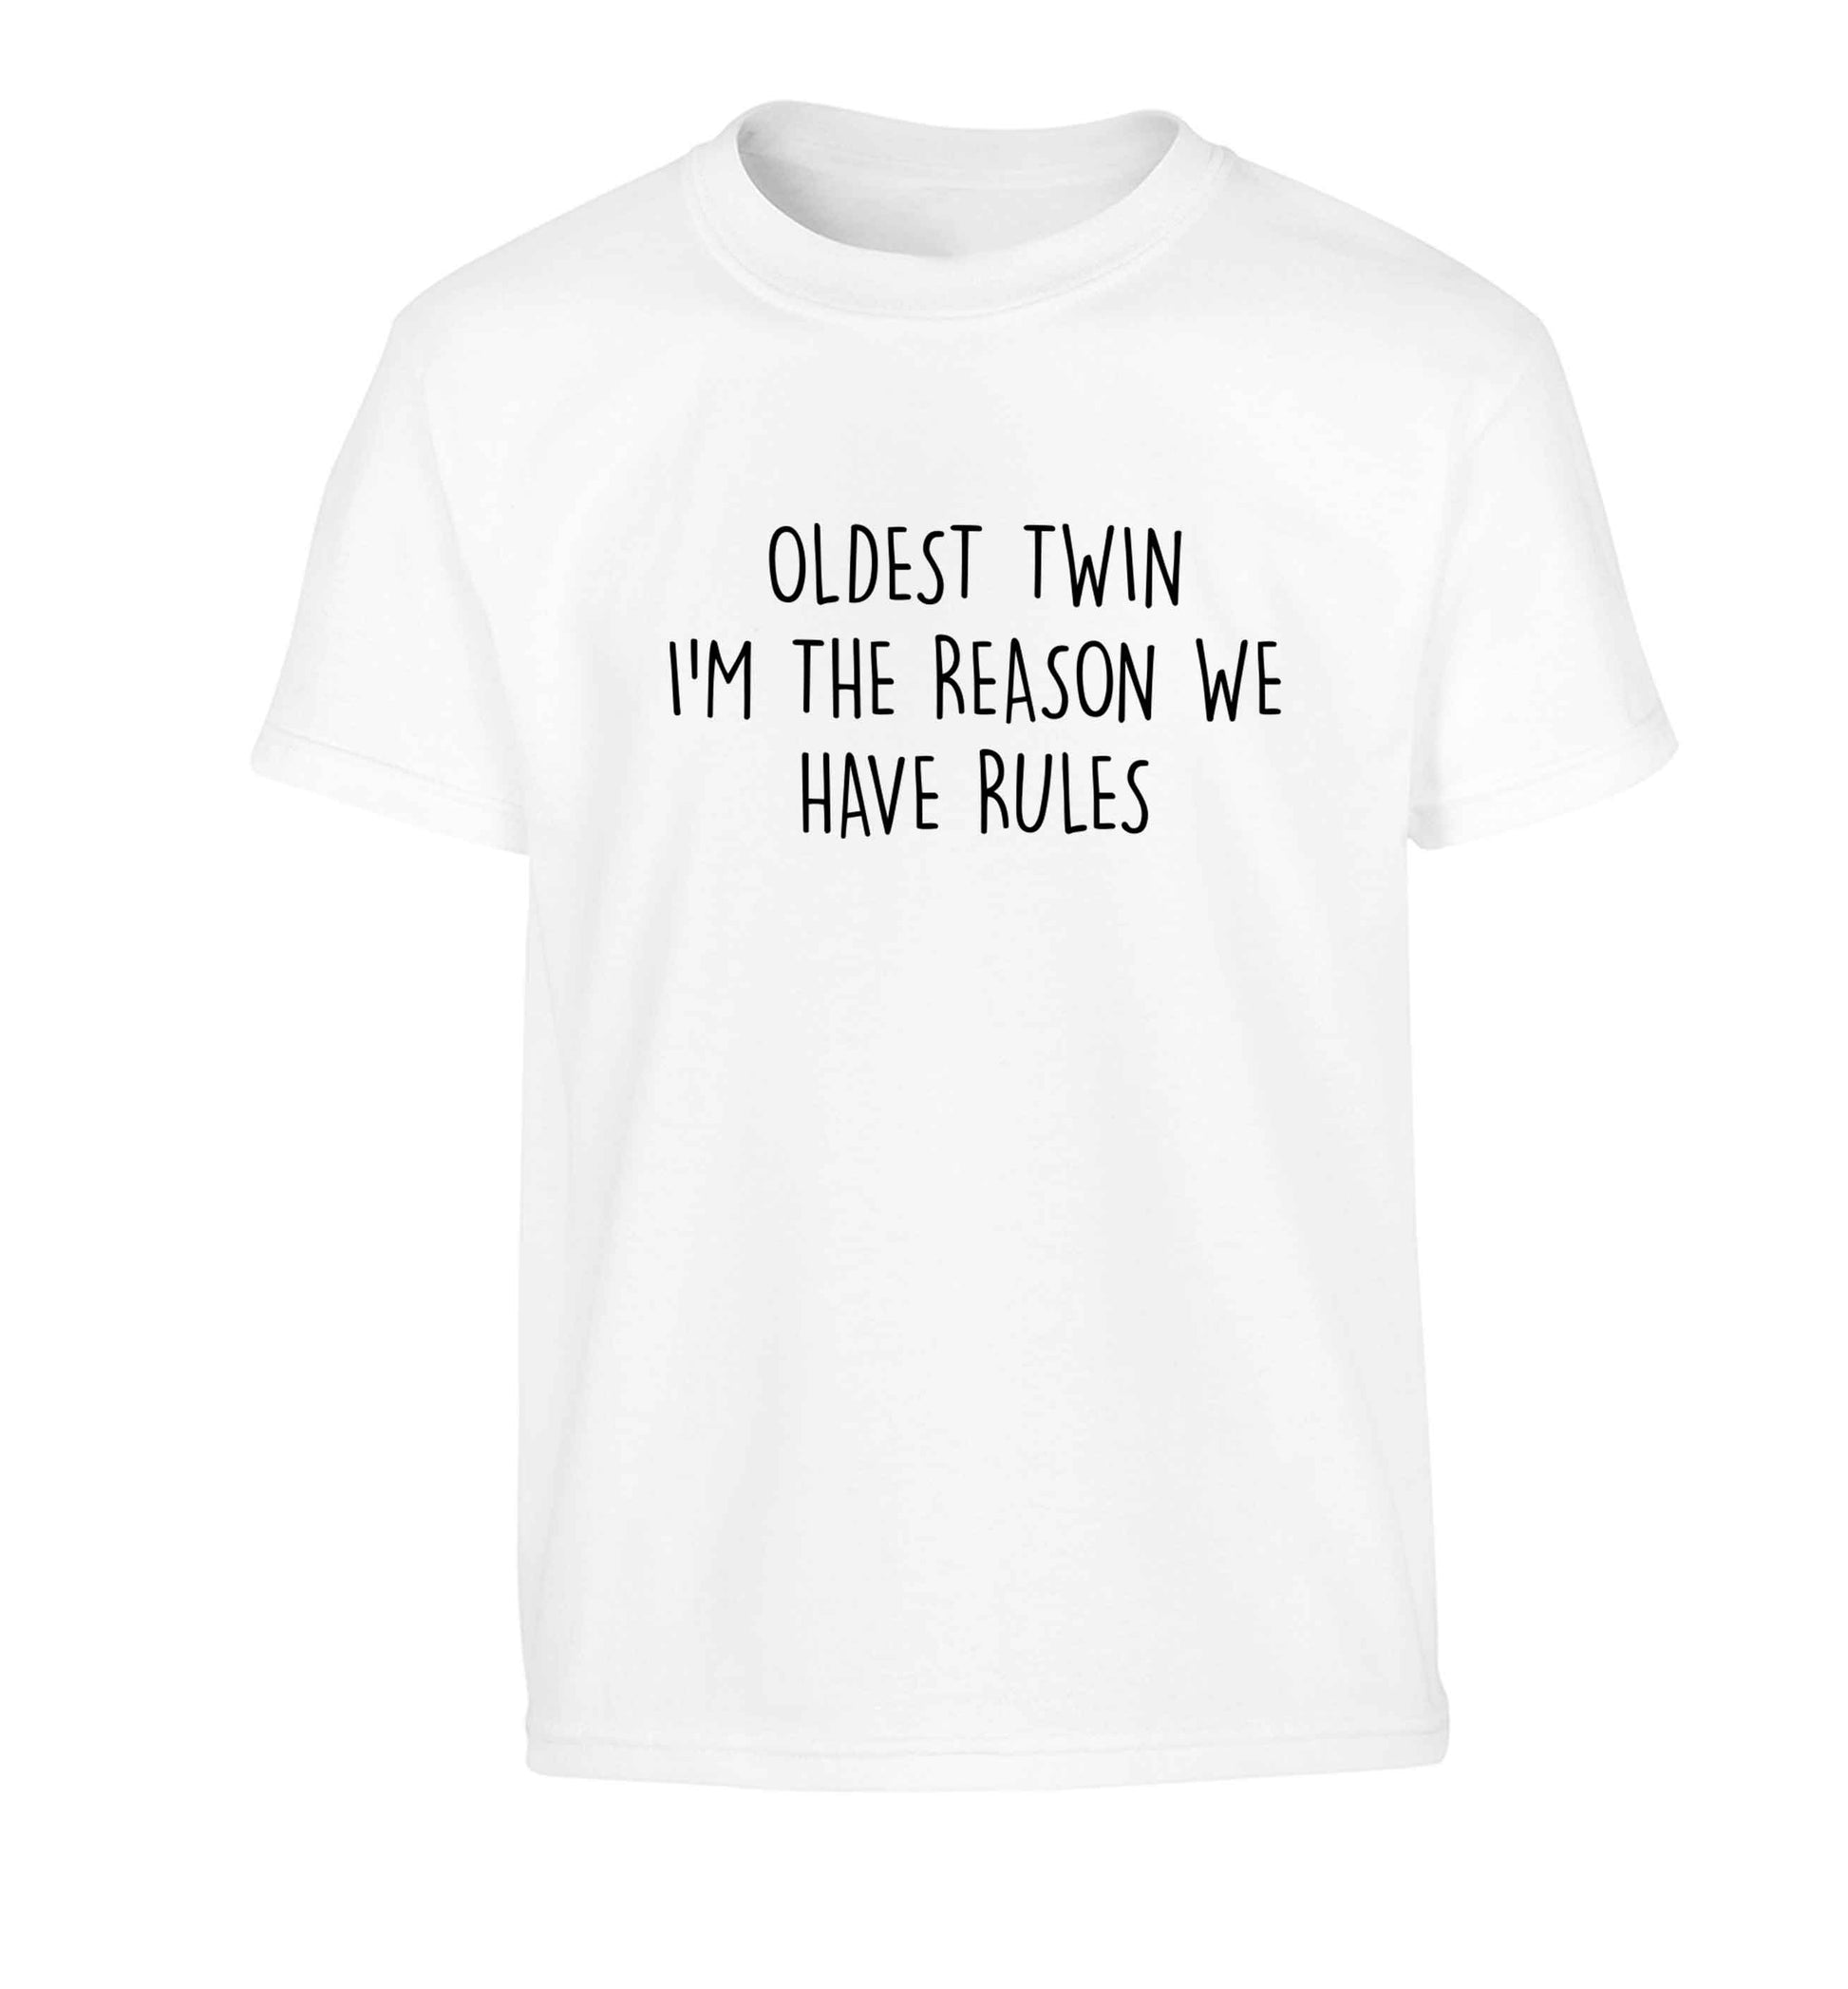 Oldest twin I'm the reason we have rules Children's white Tshirt 12-13 Years